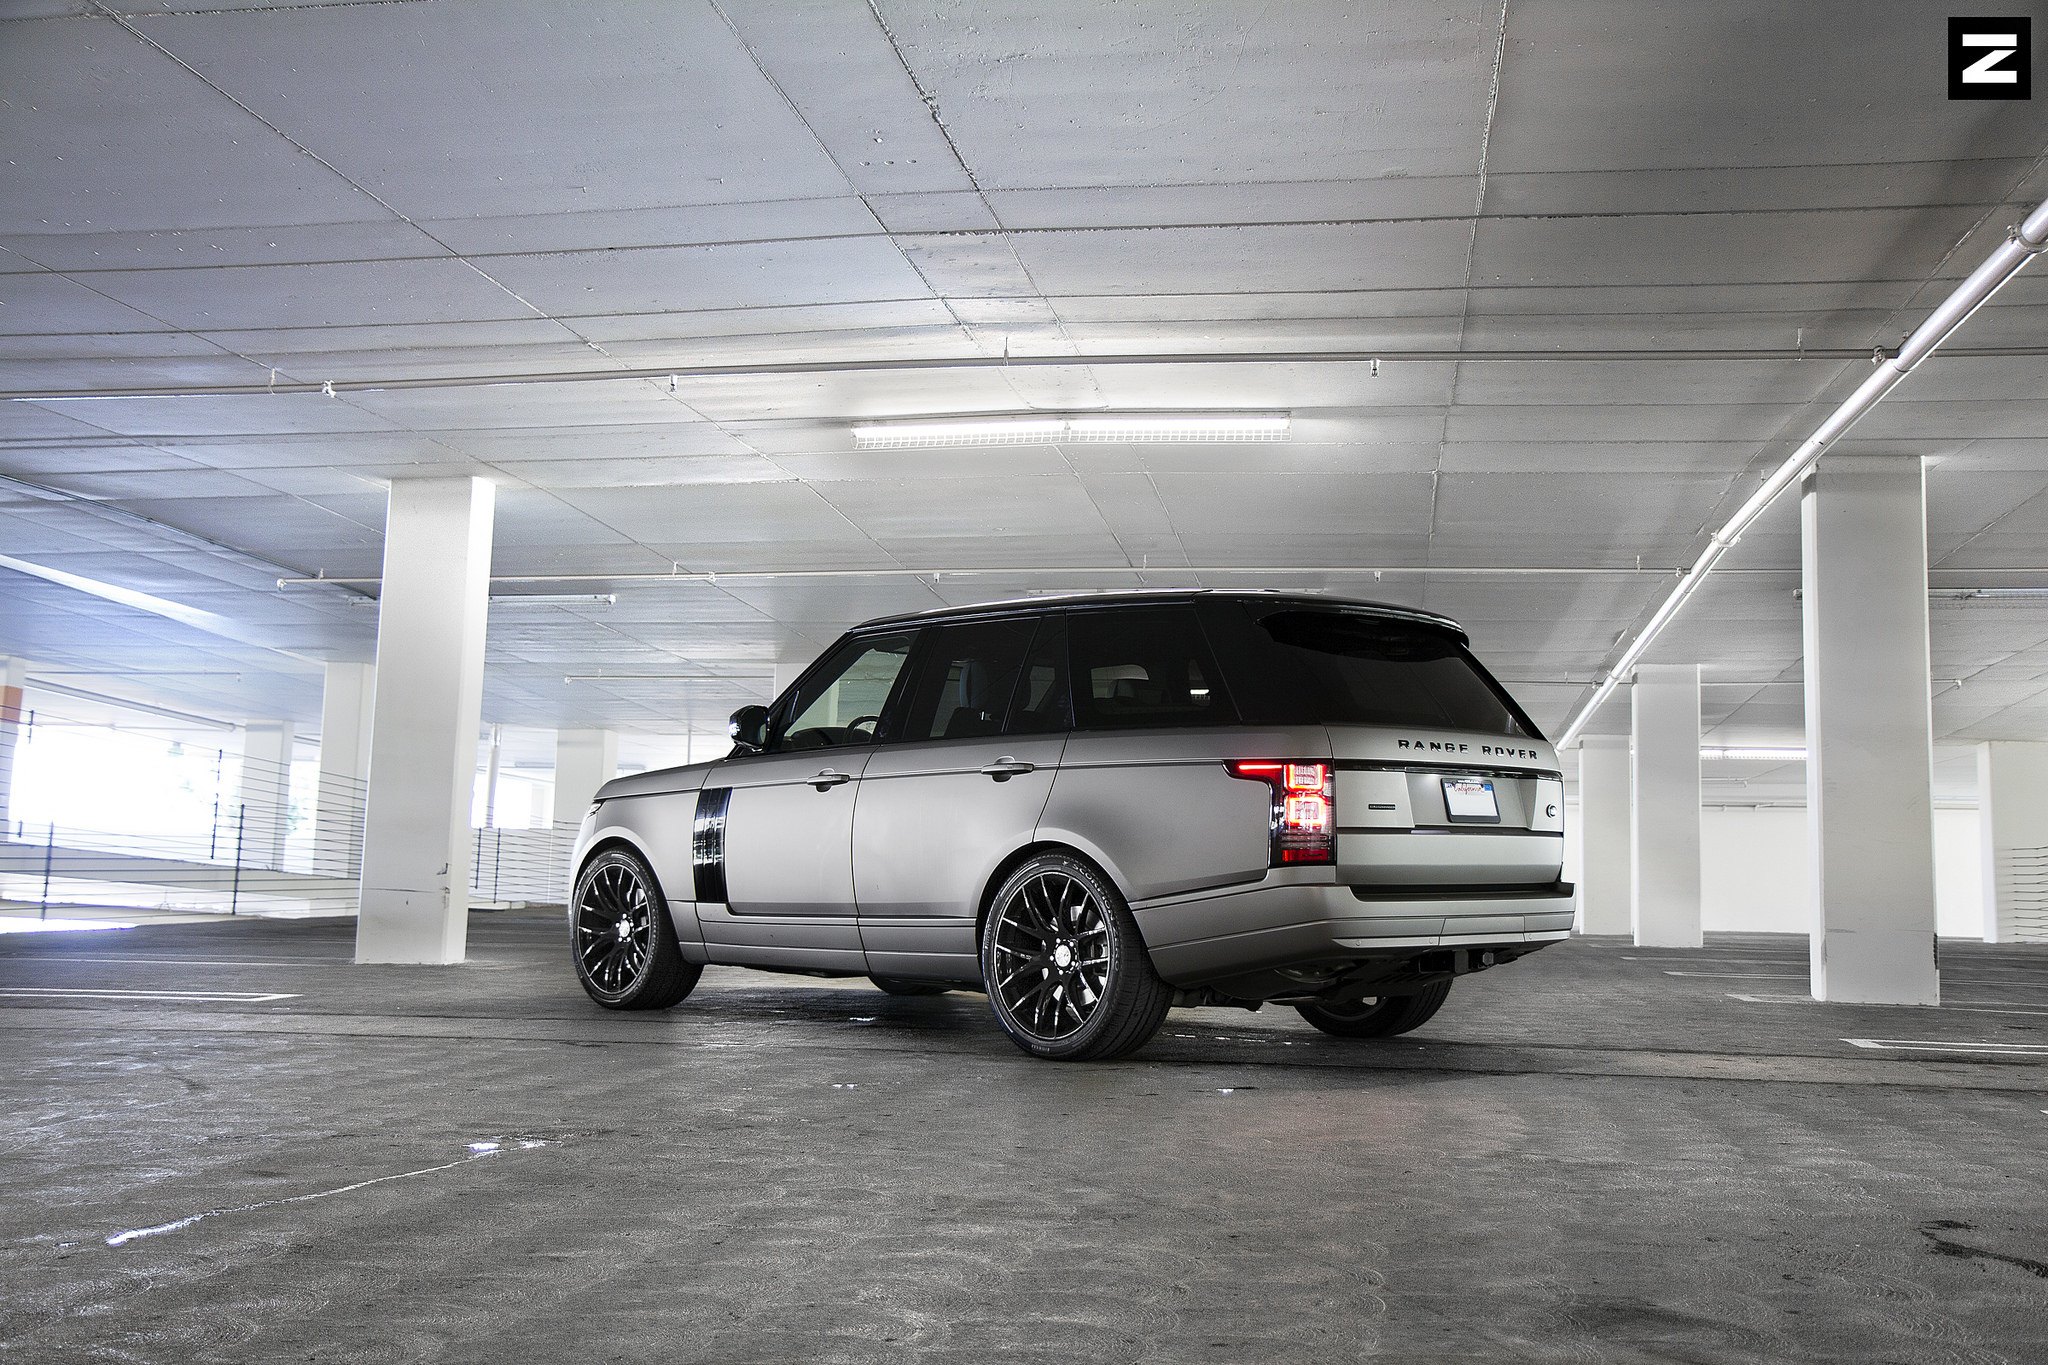 Roofline Spoiler with Light on Gray Range Rover - Photo by Zito Wheels